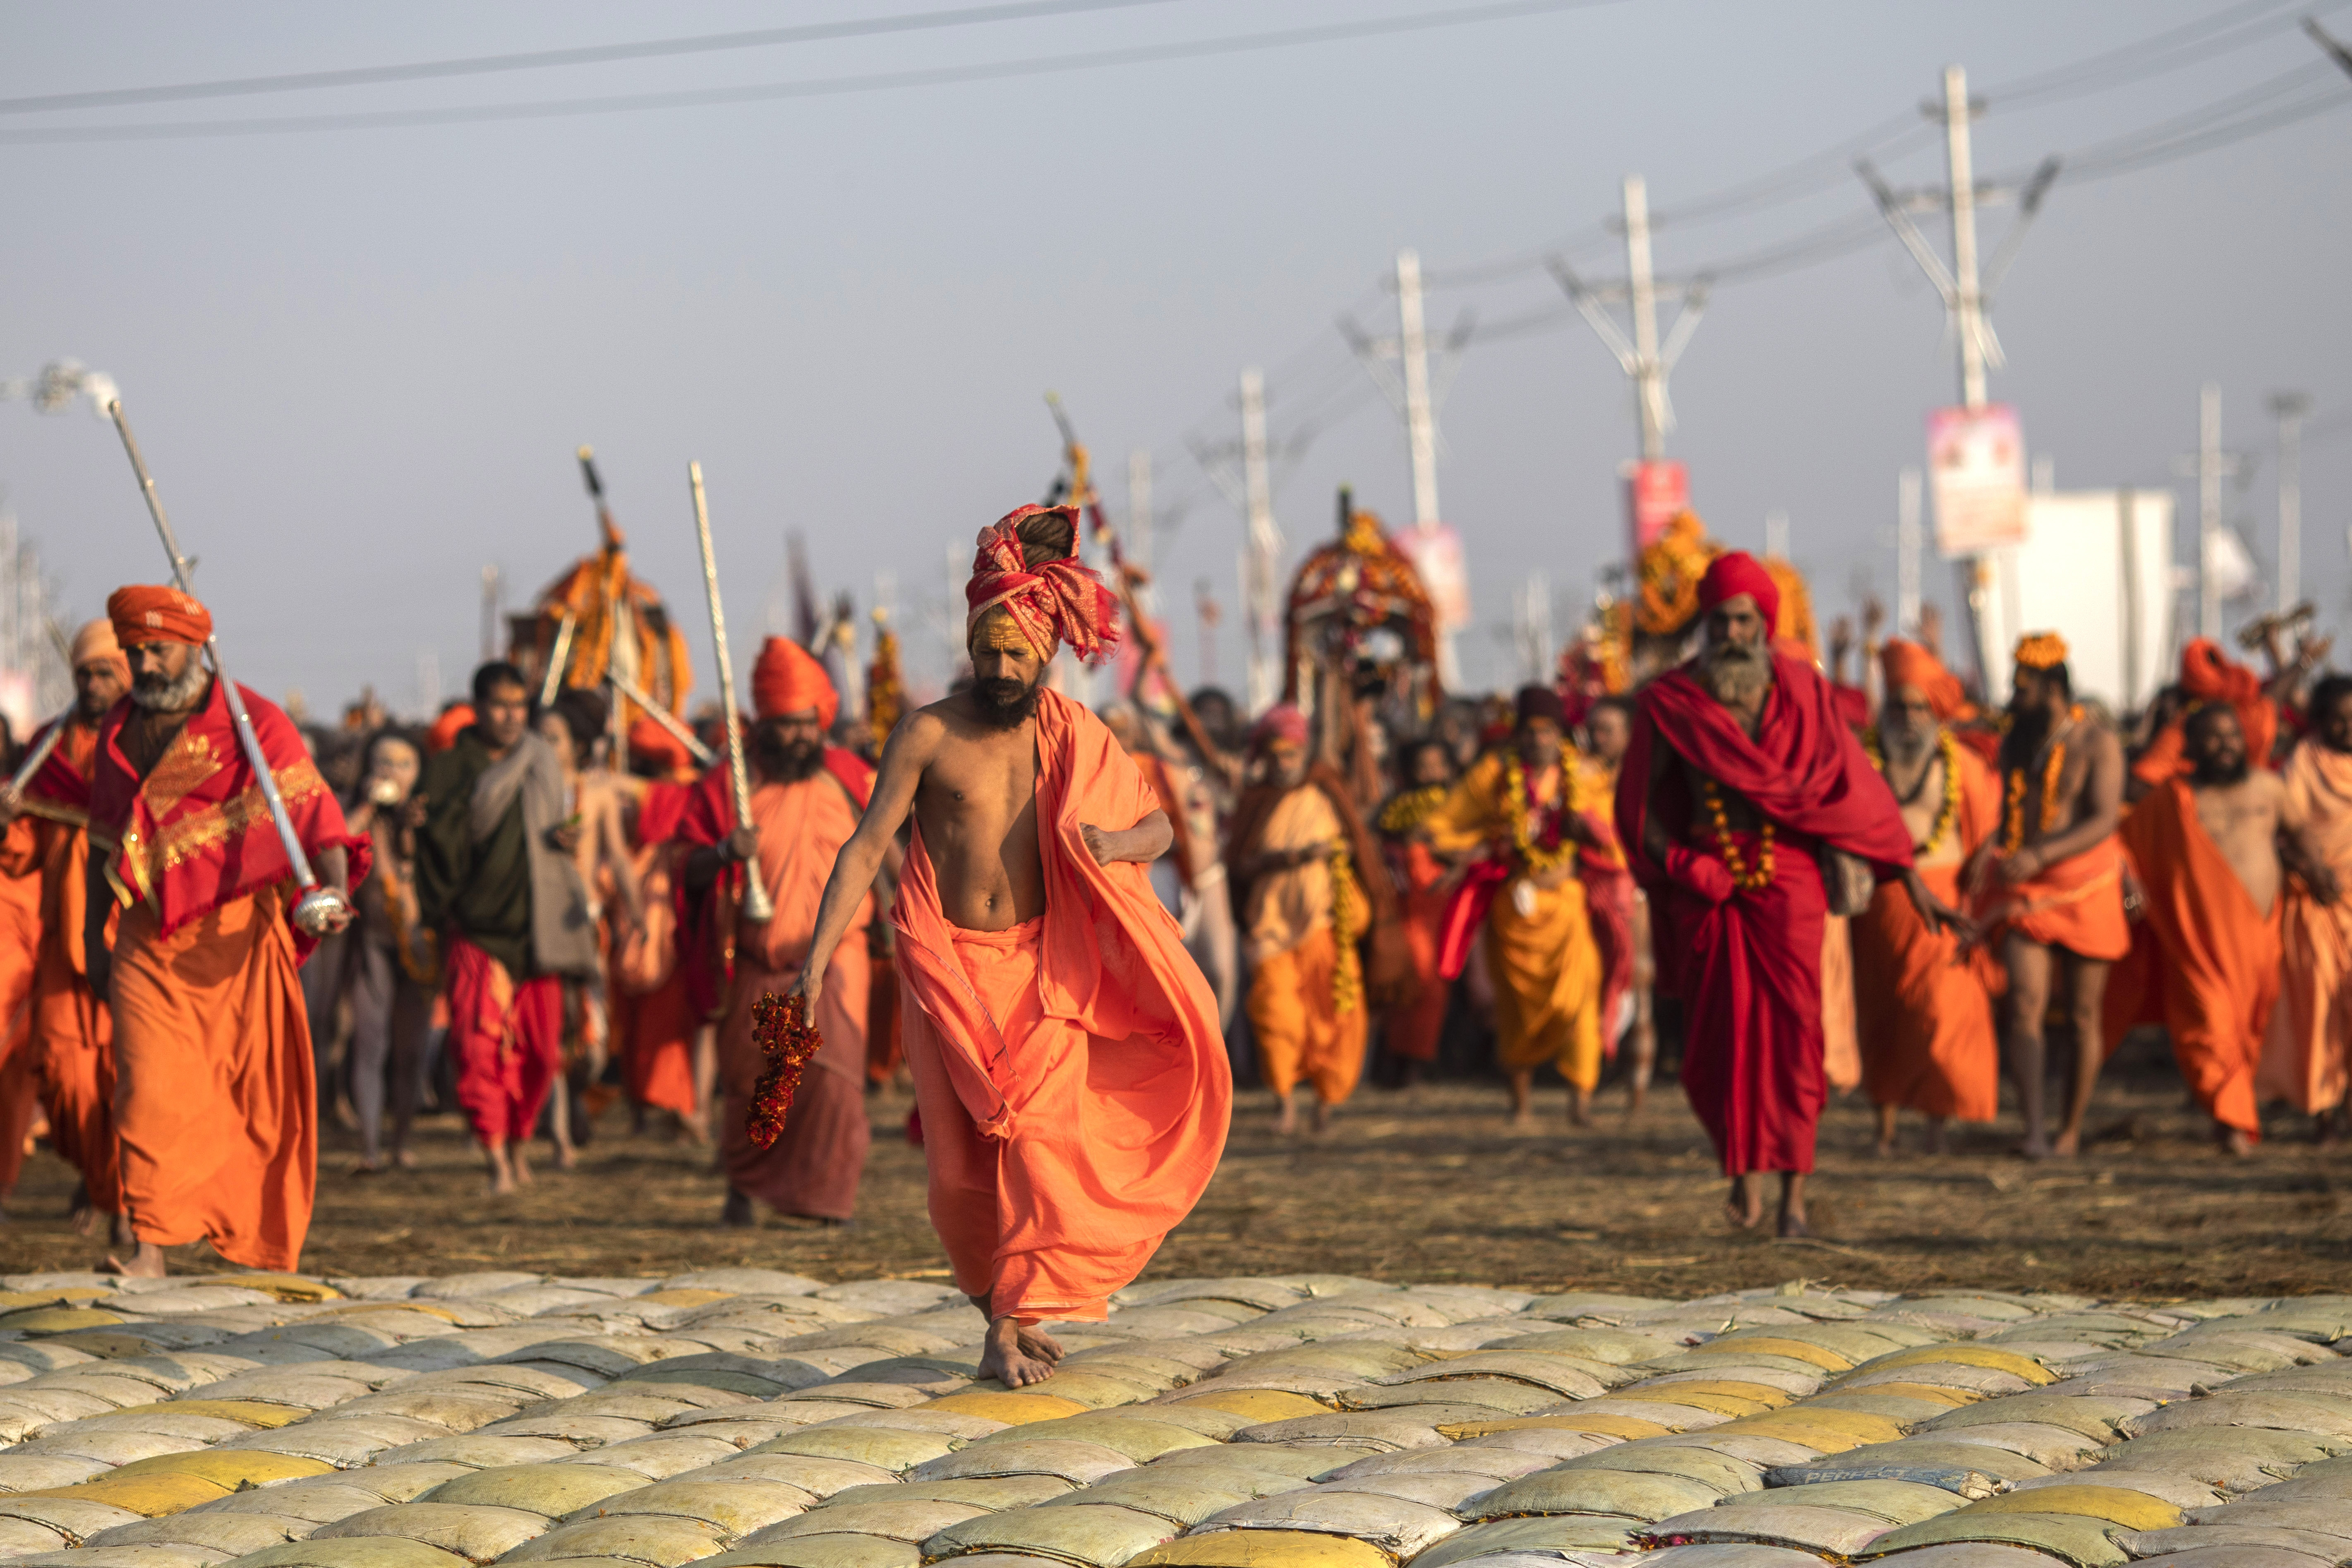 Hindu holy men arrive for ritualistic dip on auspicious Makar Sankranti day during the Kumbh Mela, or pitcher festival in Prayagraj, Uttar Pradesh state, India, Tuesday, Jan.15, 2019. The Kumbh Mela is a series of ritual baths by Hindu holy men, and other pilgrims at the confluence of three sacred rivers the Yamuna, the Ganges and the mythical Saraswati  that dates back to at least medieval times. The city's Mughal-era name Allahabad was recently changed to Prayagraj. (AP Photo/Bernat Armangue)